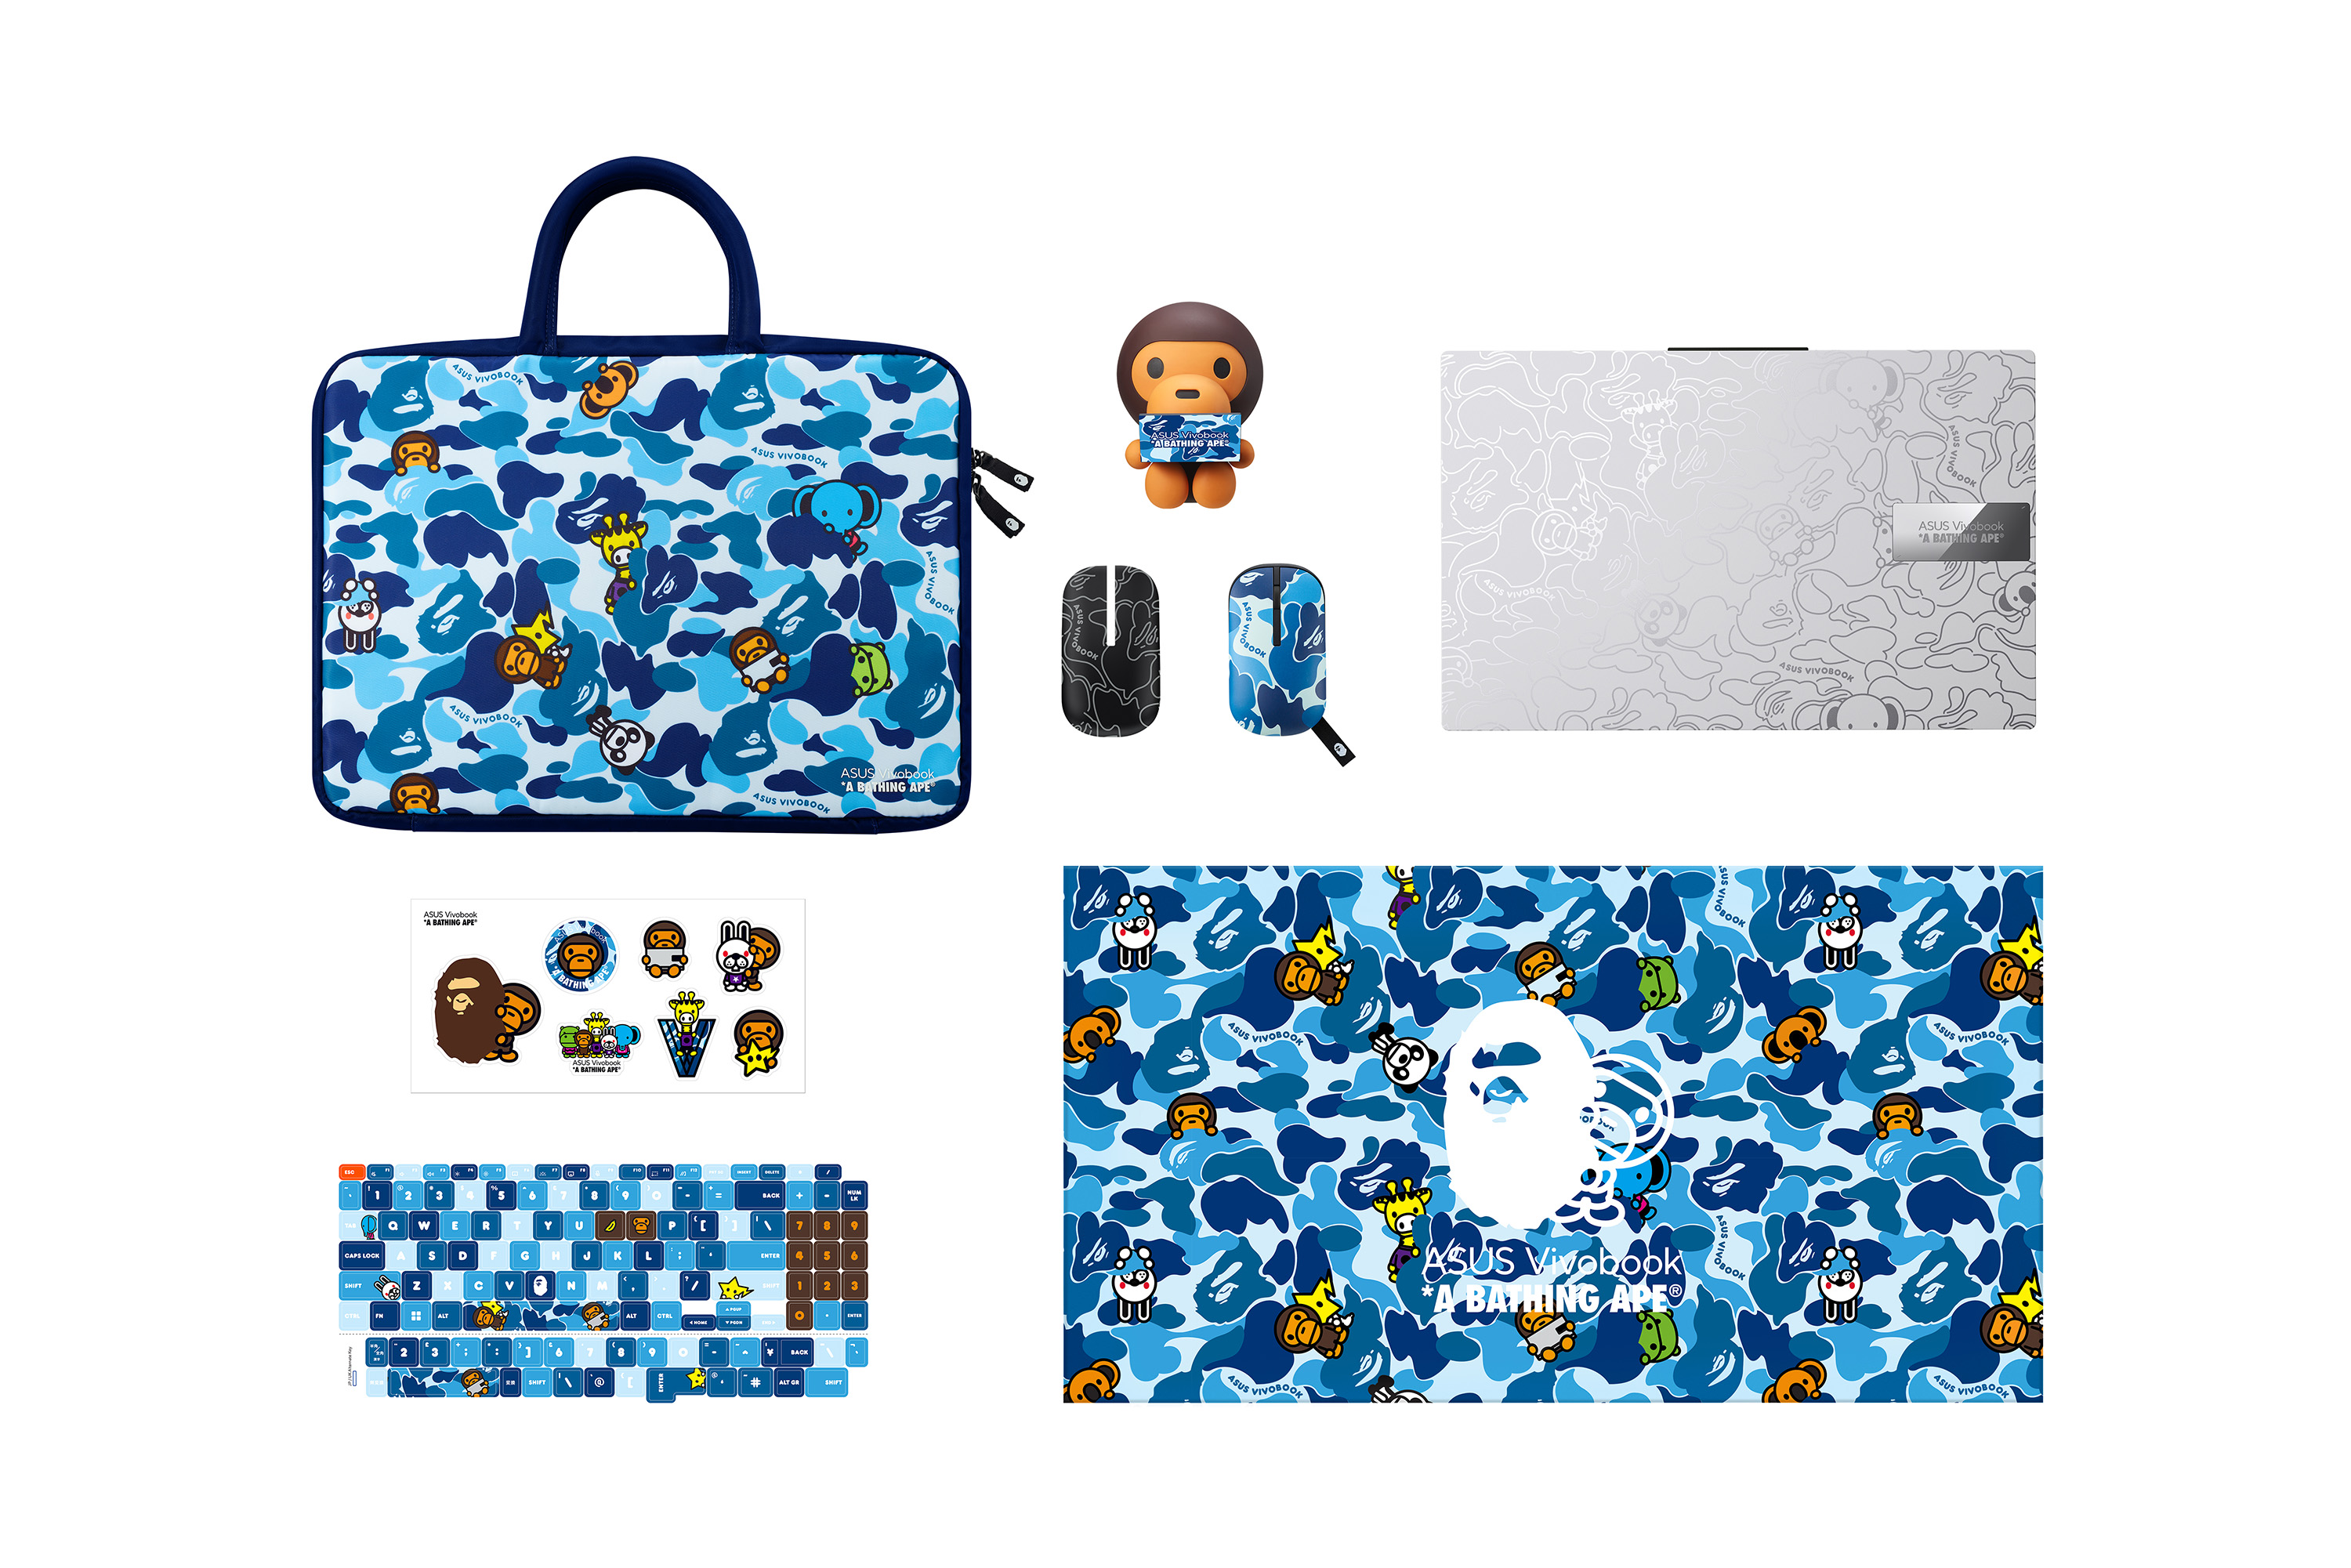 vivobook_s_15_oled_bape_edition_blue_camo_bundle_with_silver_laptop__overlooking_view_of_silver_laptops_and_blue_camo_bundle